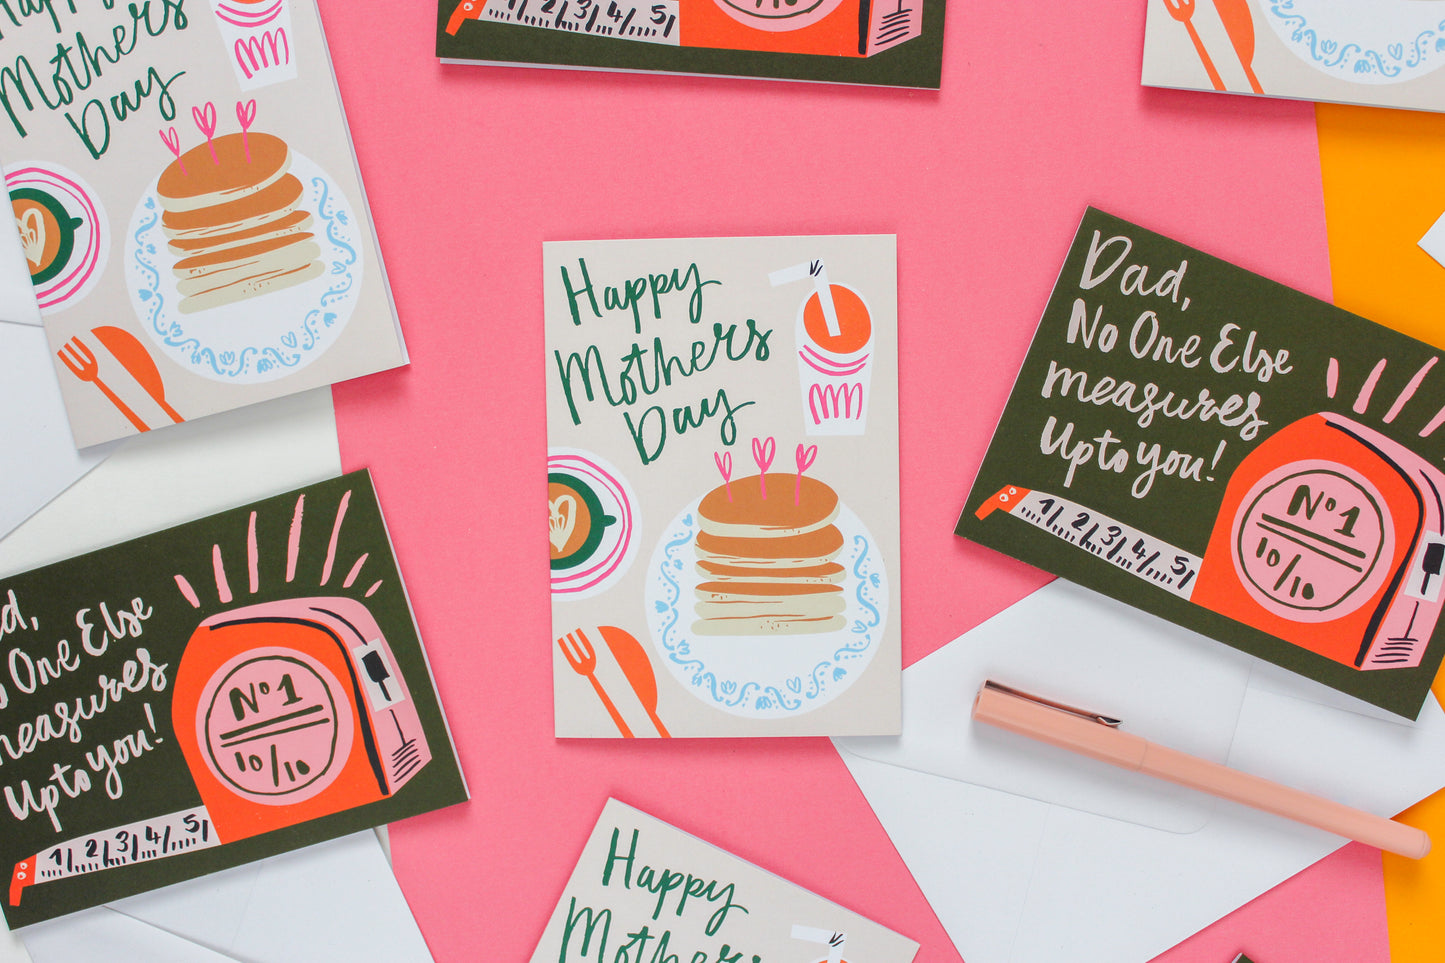 Happy Mothers Day Breakfast Card, Breakfast in Bed, Mother's Day